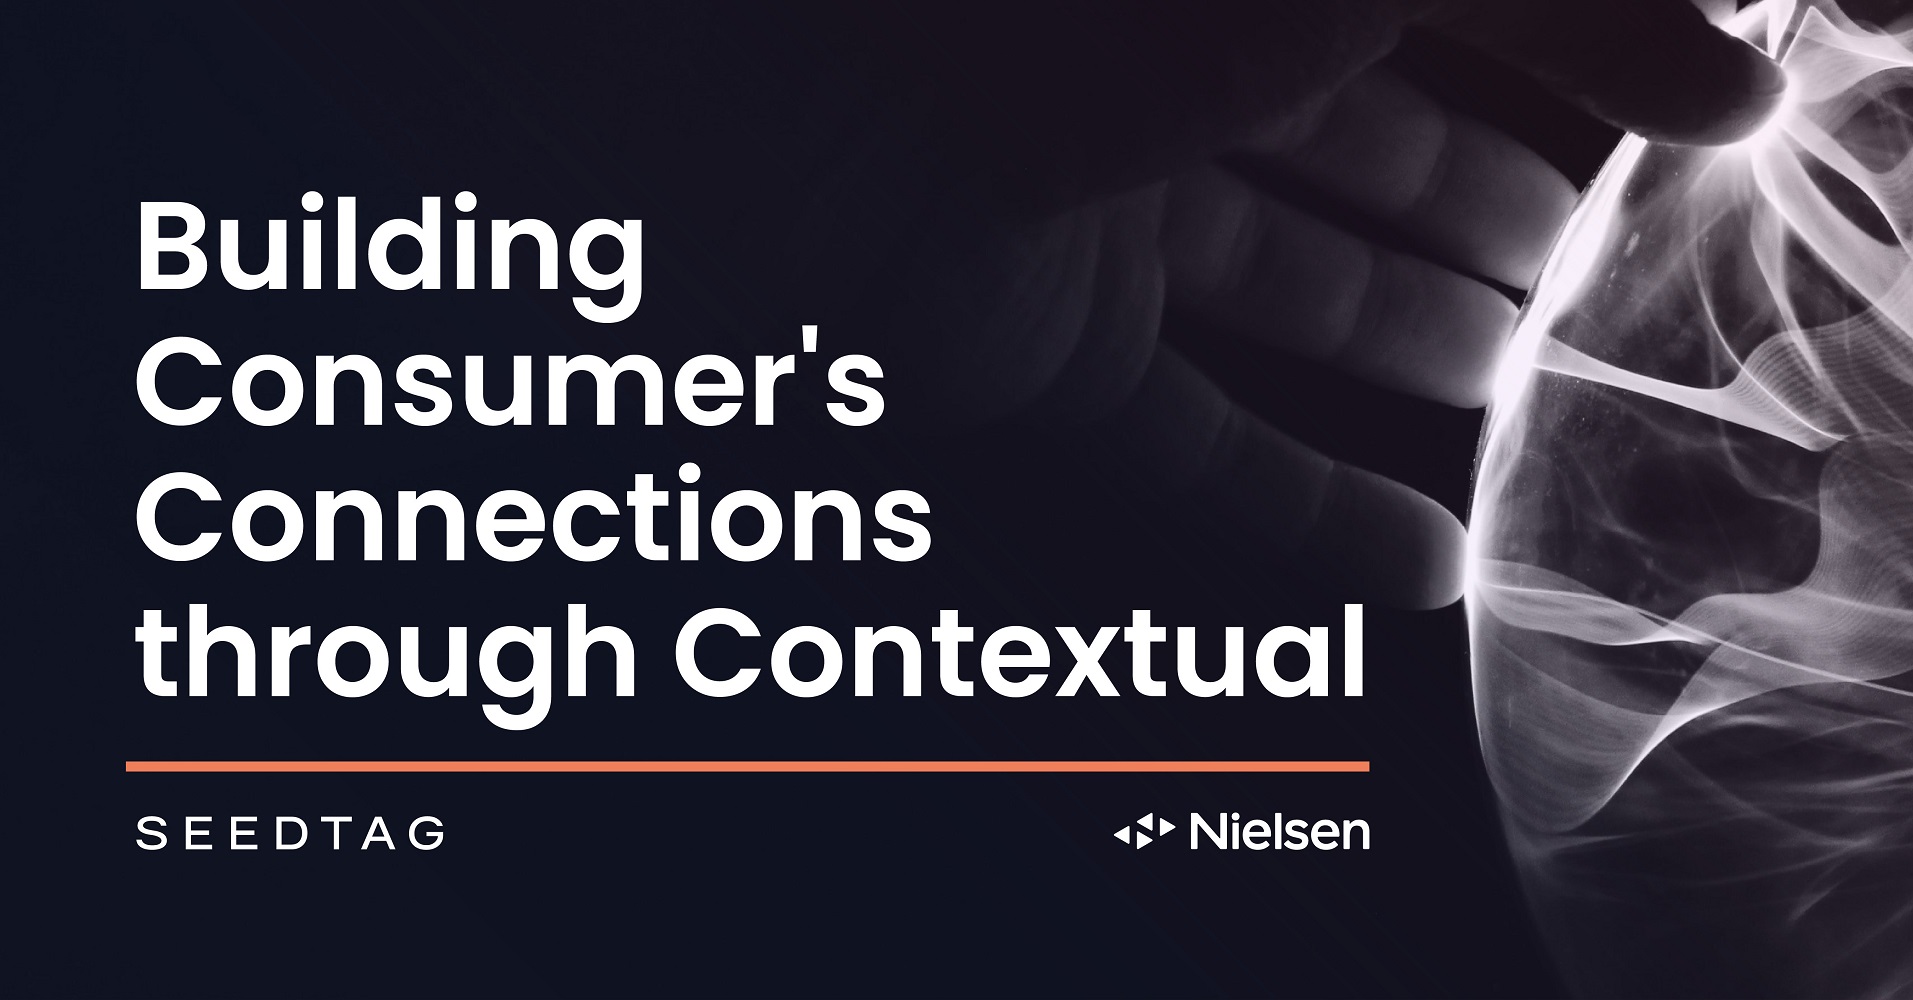 Contextual Targeting Boosts Consumer Interest in Advertising by 32%